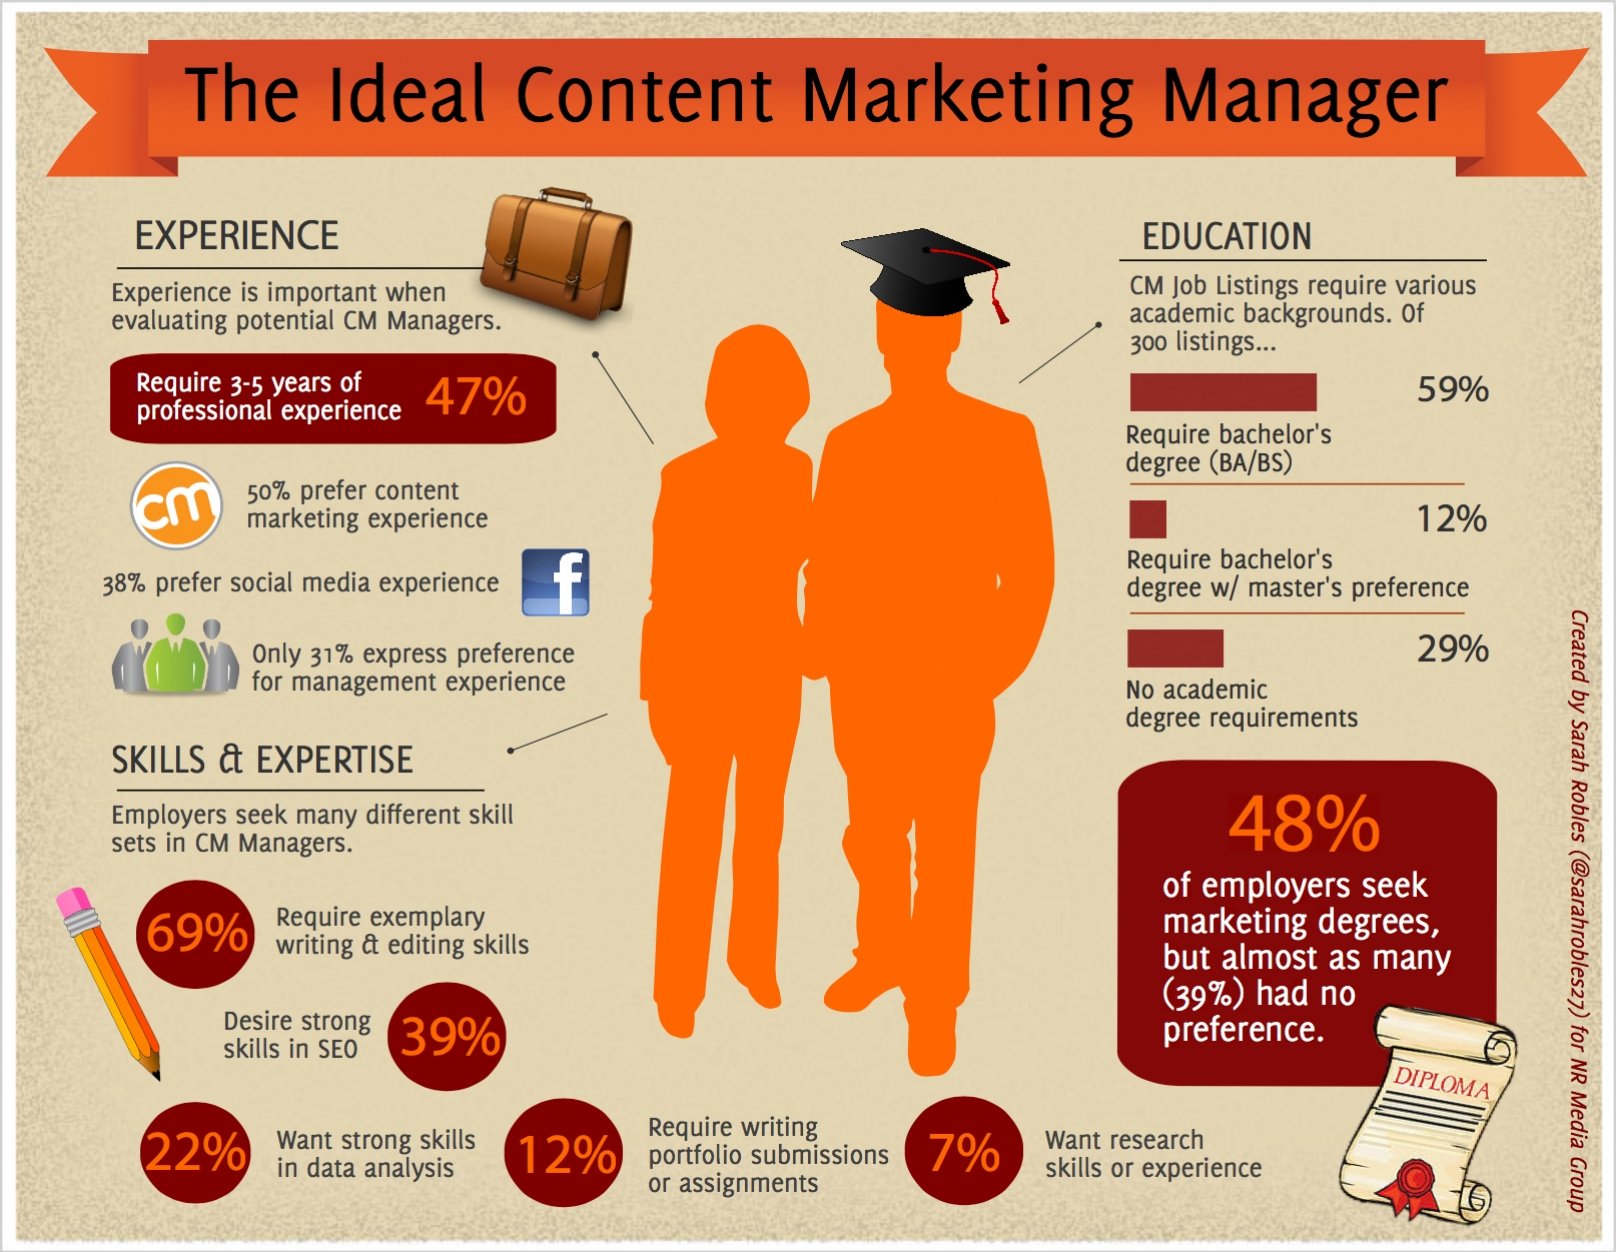 The job of a content marketing manager requires a combination of education, skills, and experience.